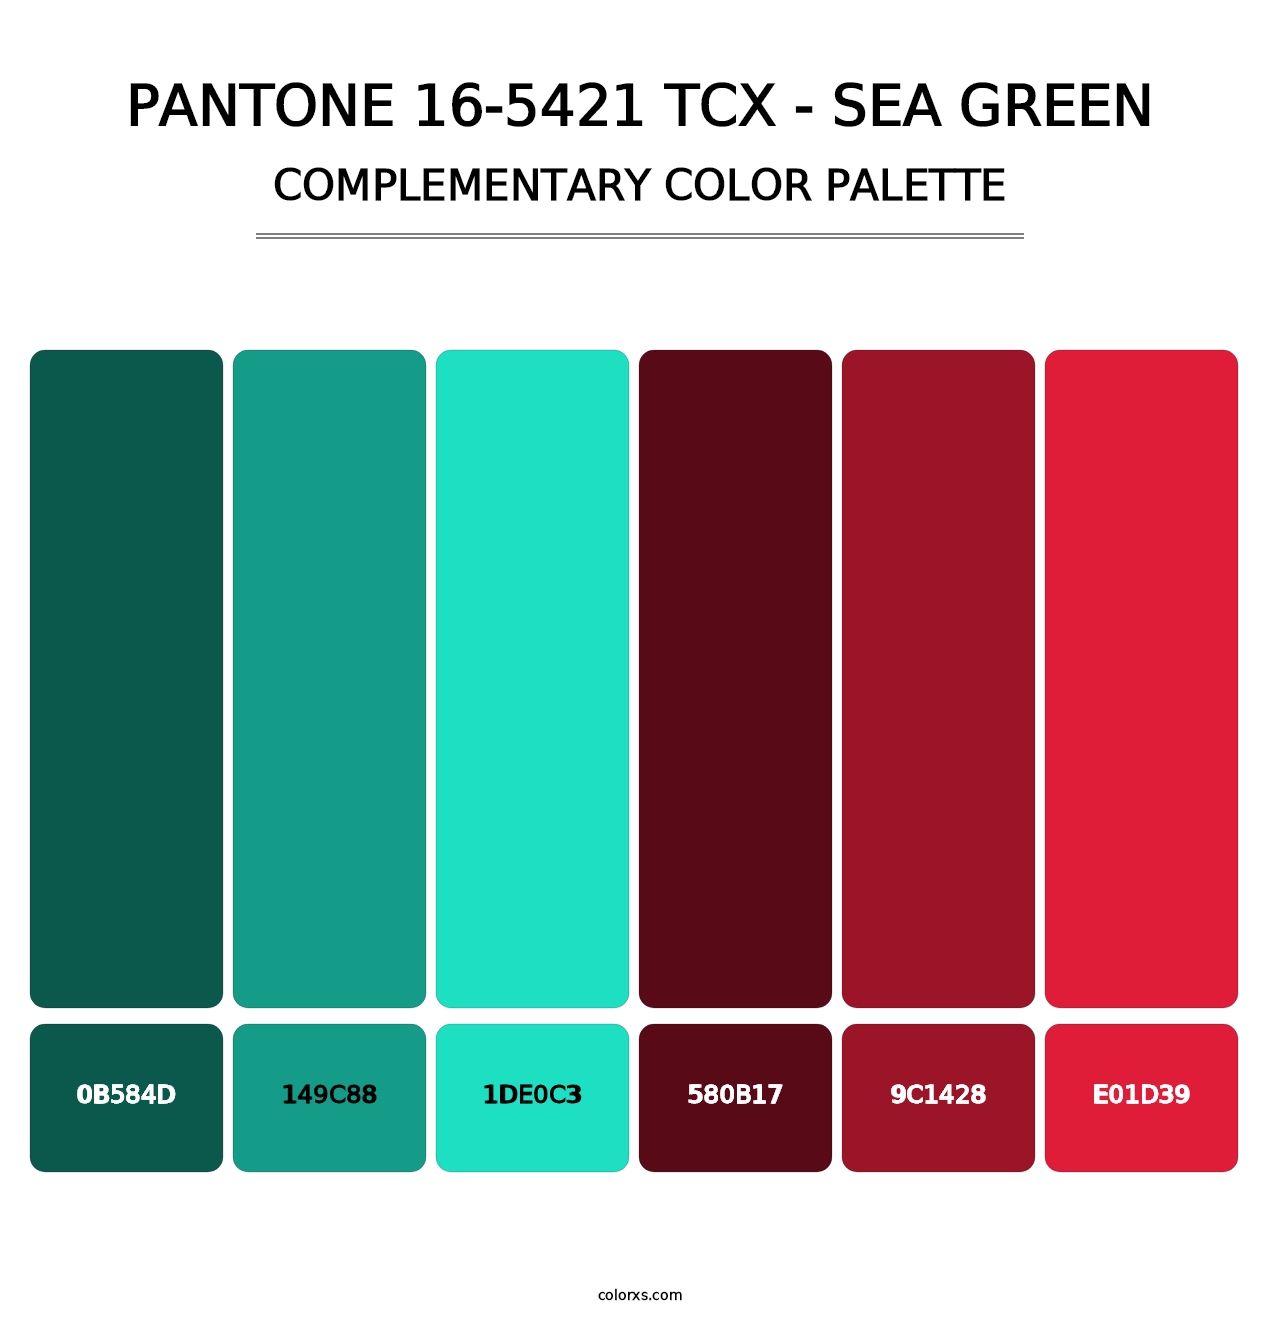 PANTONE 16-5421 TCX - Sea Green - Complementary Color Palette